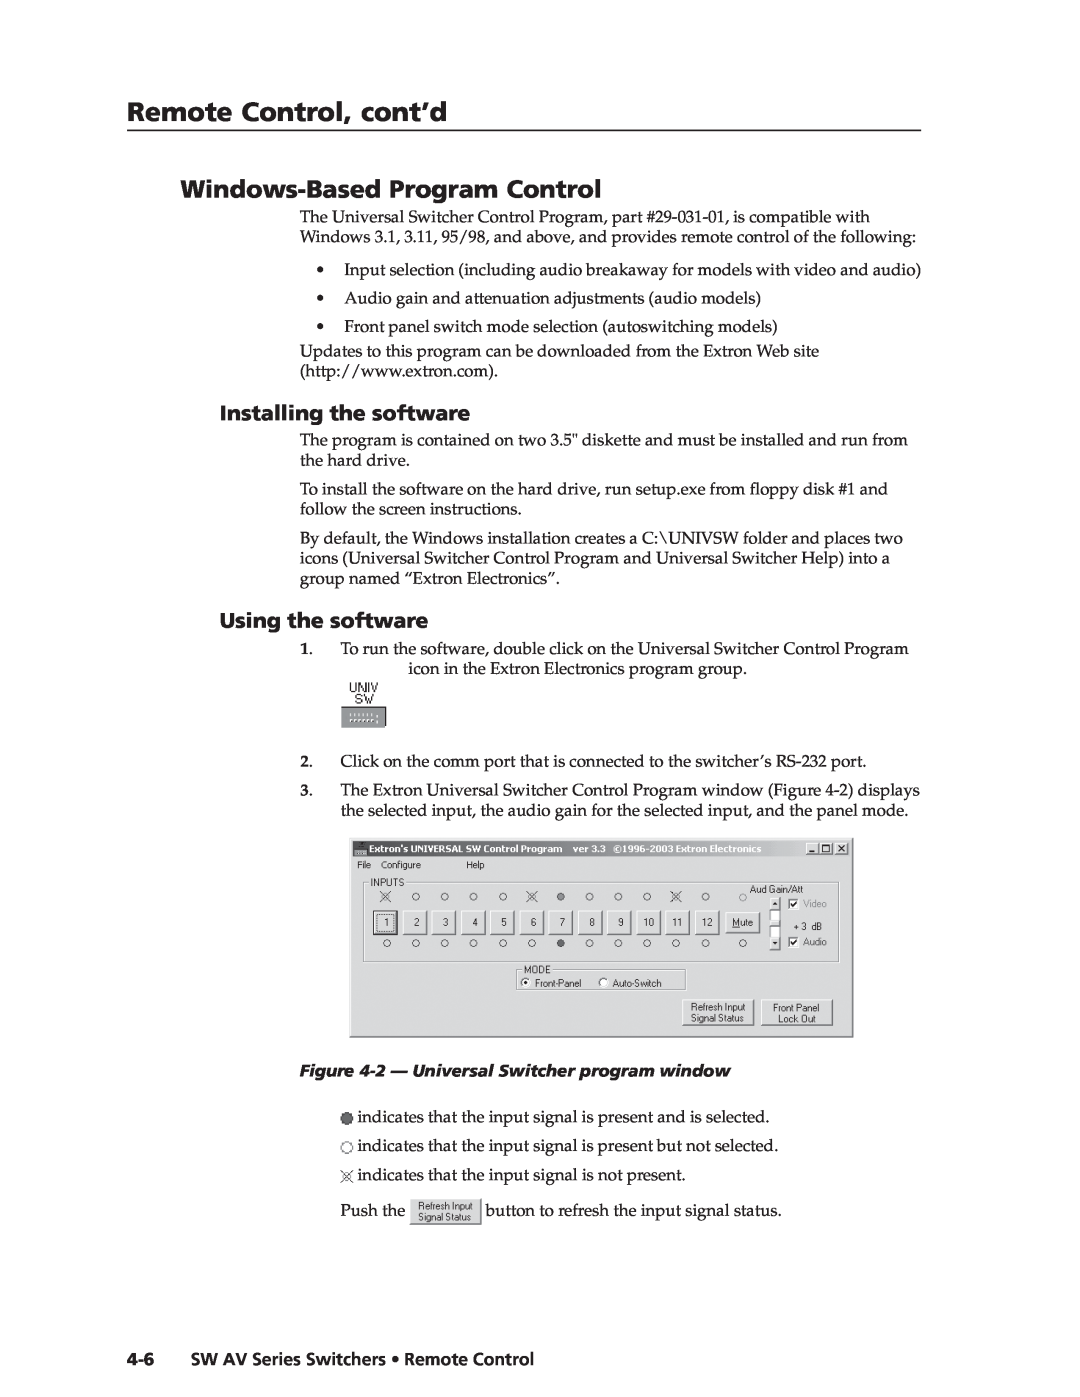 Extron electronic SW AV Windows-Based Program Control, Installing the software, Using the software, Remote Control, cont’d 